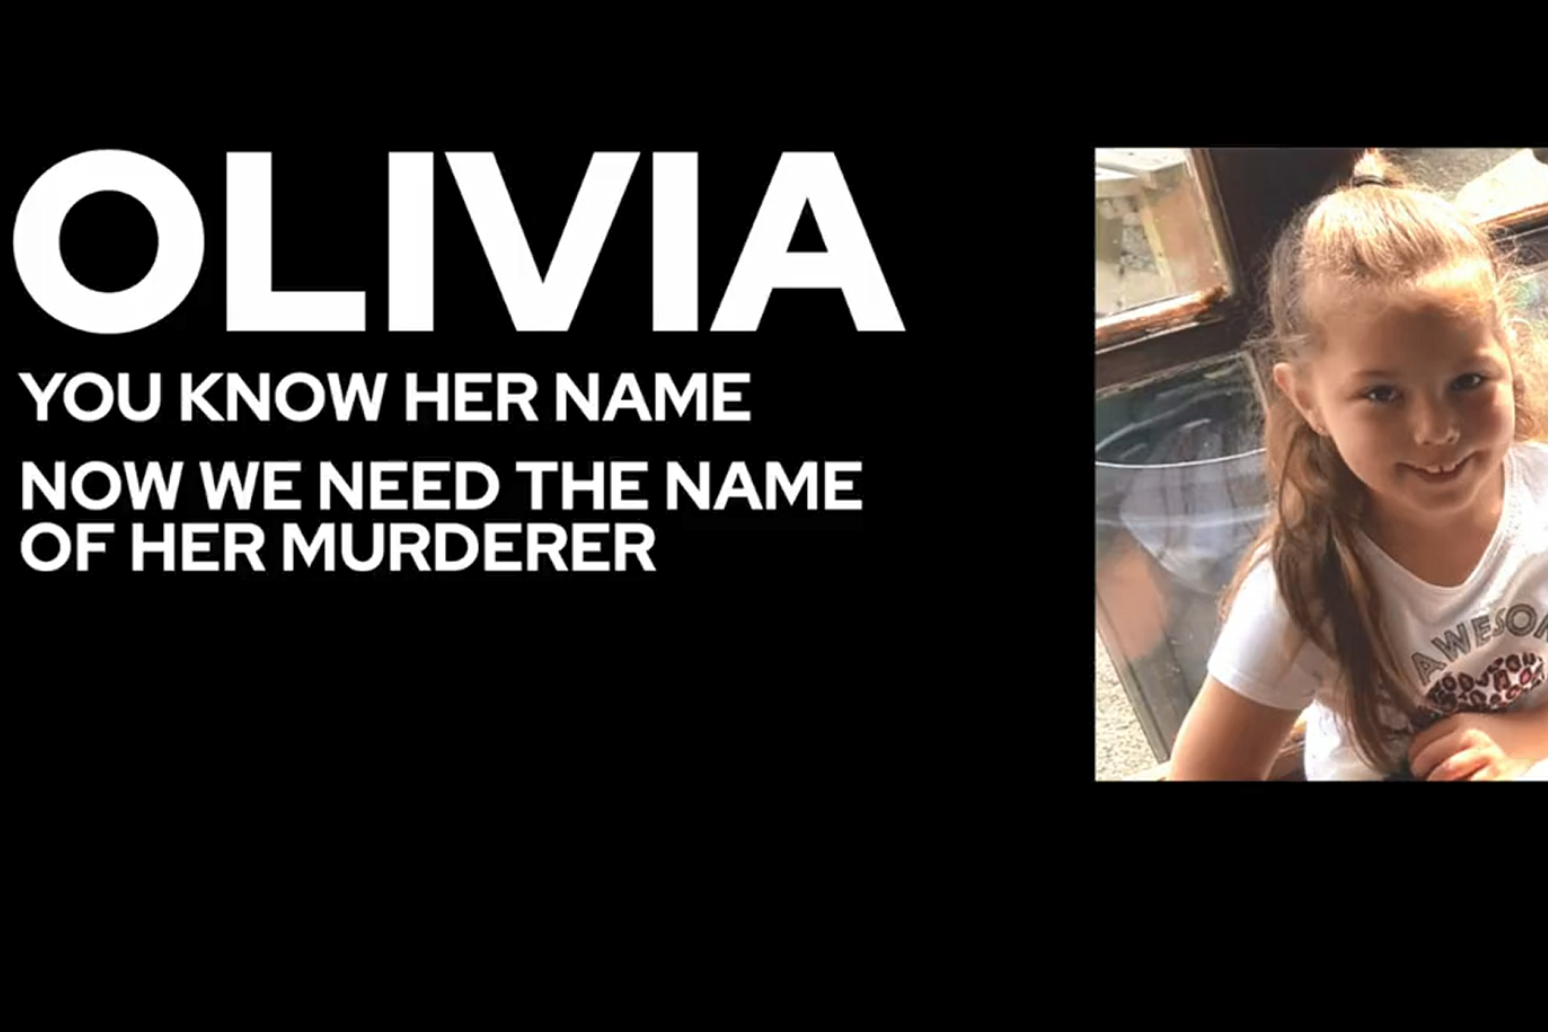 Withholding information on Olivia’s murder is protecting killers, warn Merseyside Police 